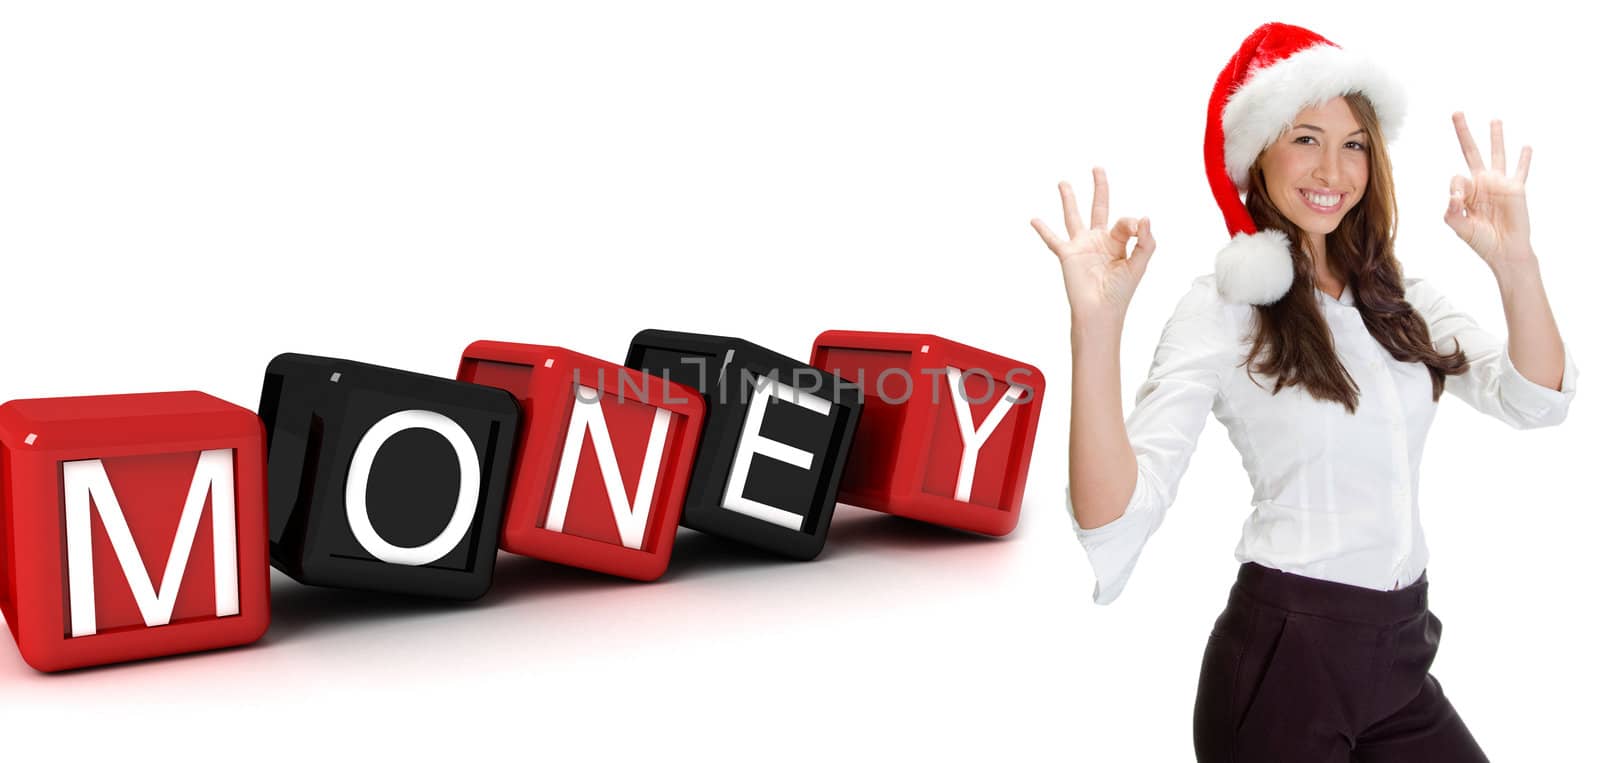 three dimensional building blocks with money text and women gesture okay  by imagerymajestic